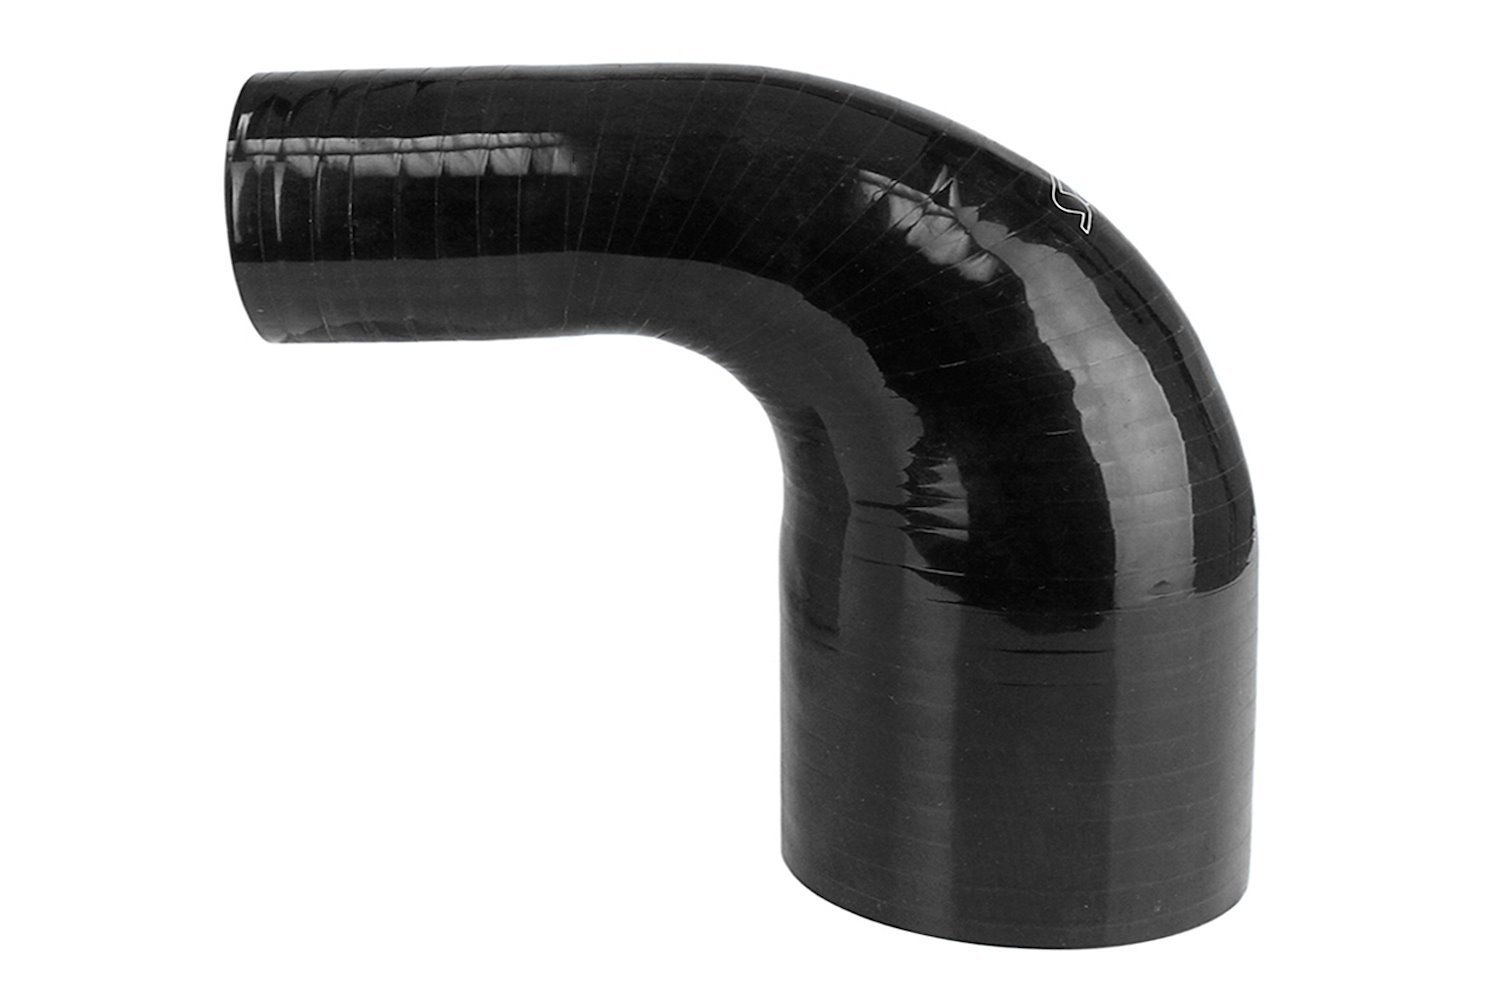 HTSER90-450-500-BLK Silicone 90-Degree Elbow Hose, High-Temp 4-Ply Reinforced, 4-1/2 in. - 5 in. ID, Black